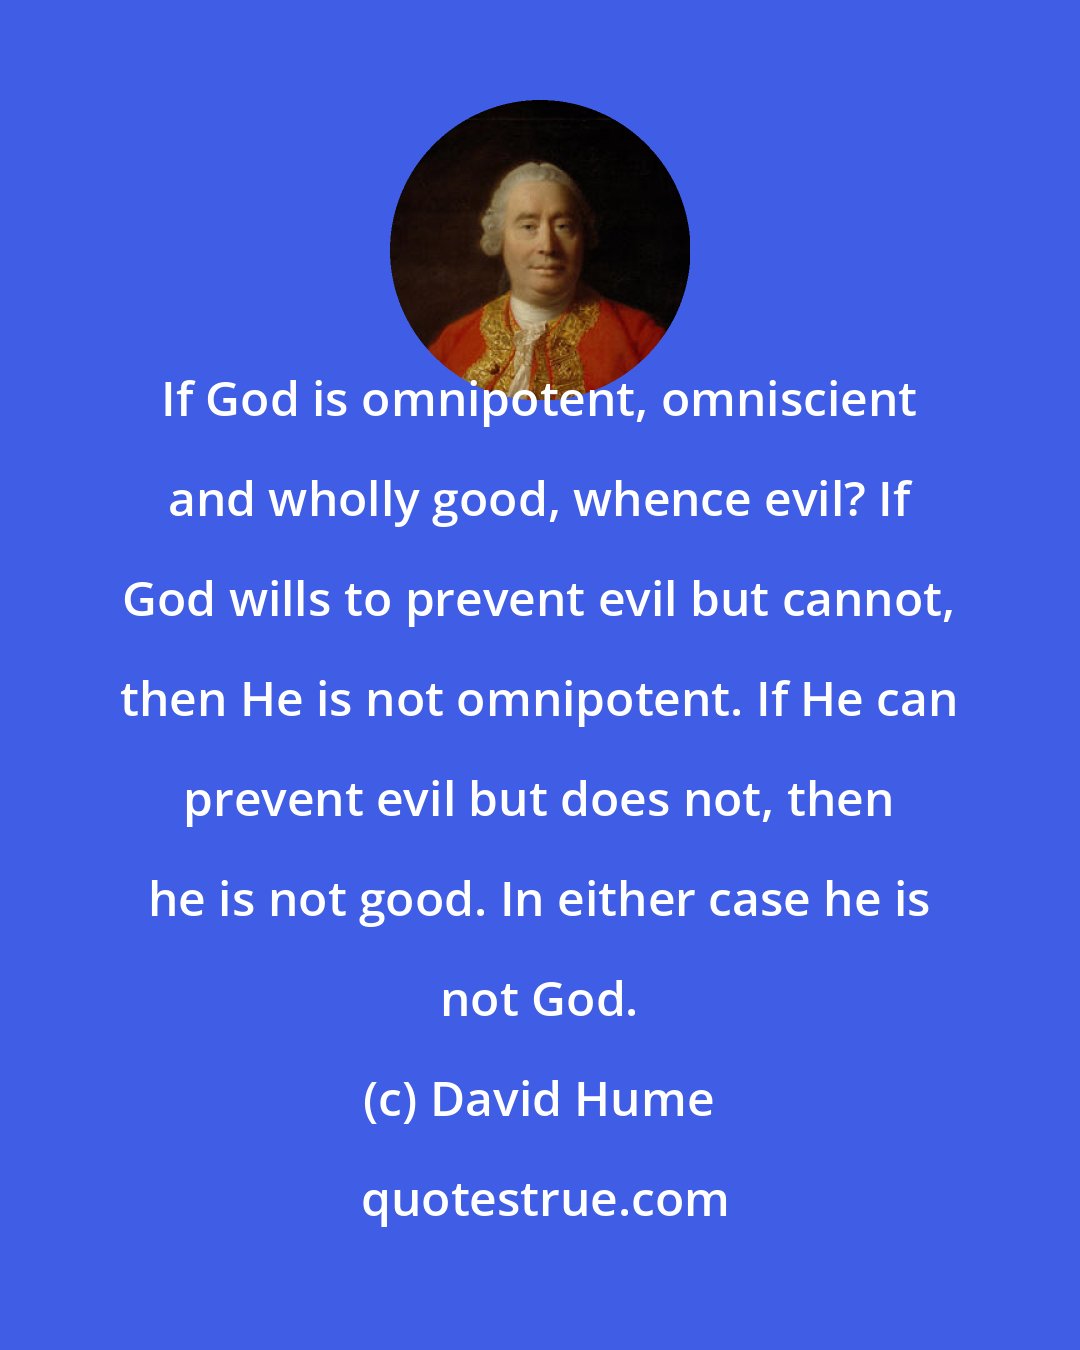 David Hume: If God is omnipotent, omniscient and wholly good, whence evil? If God wills to prevent evil but cannot, then He is not omnipotent. If He can prevent evil but does not, then he is not good. In either case he is not God.